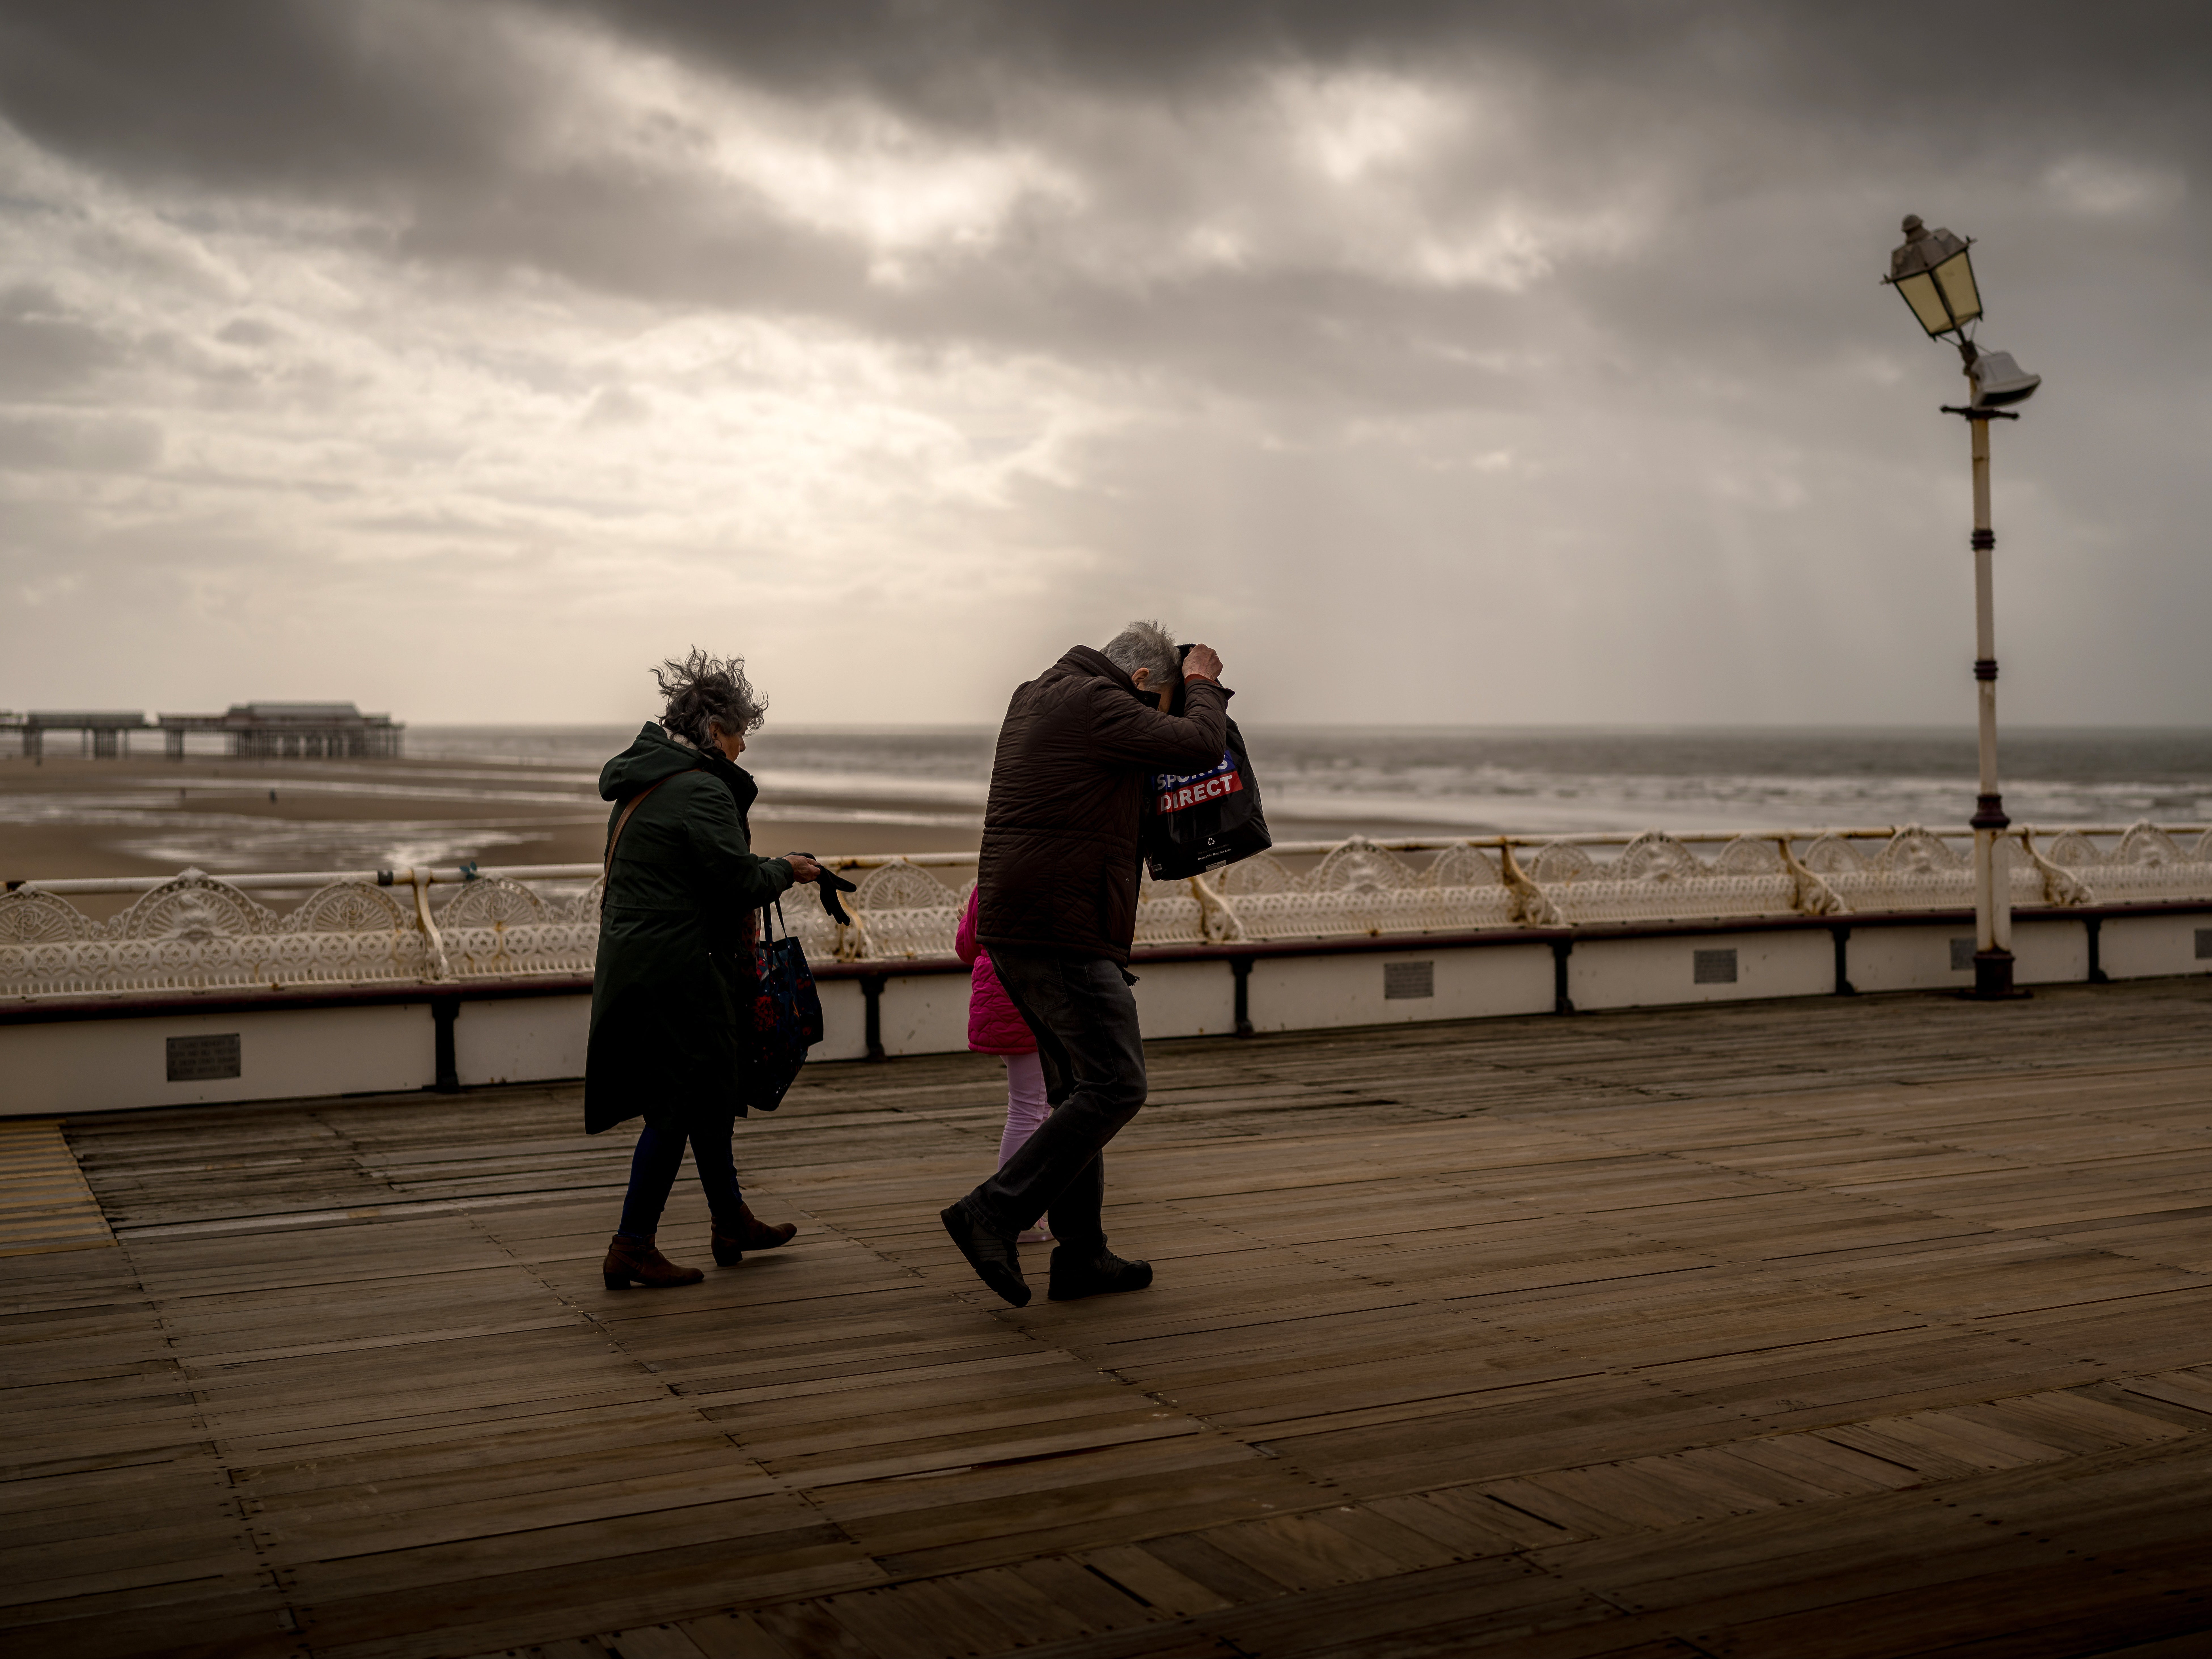 People brave the wind and rain on Blackpool’s North Pier as heavy clouds coming from the west signal the approach of Storm Kathleen